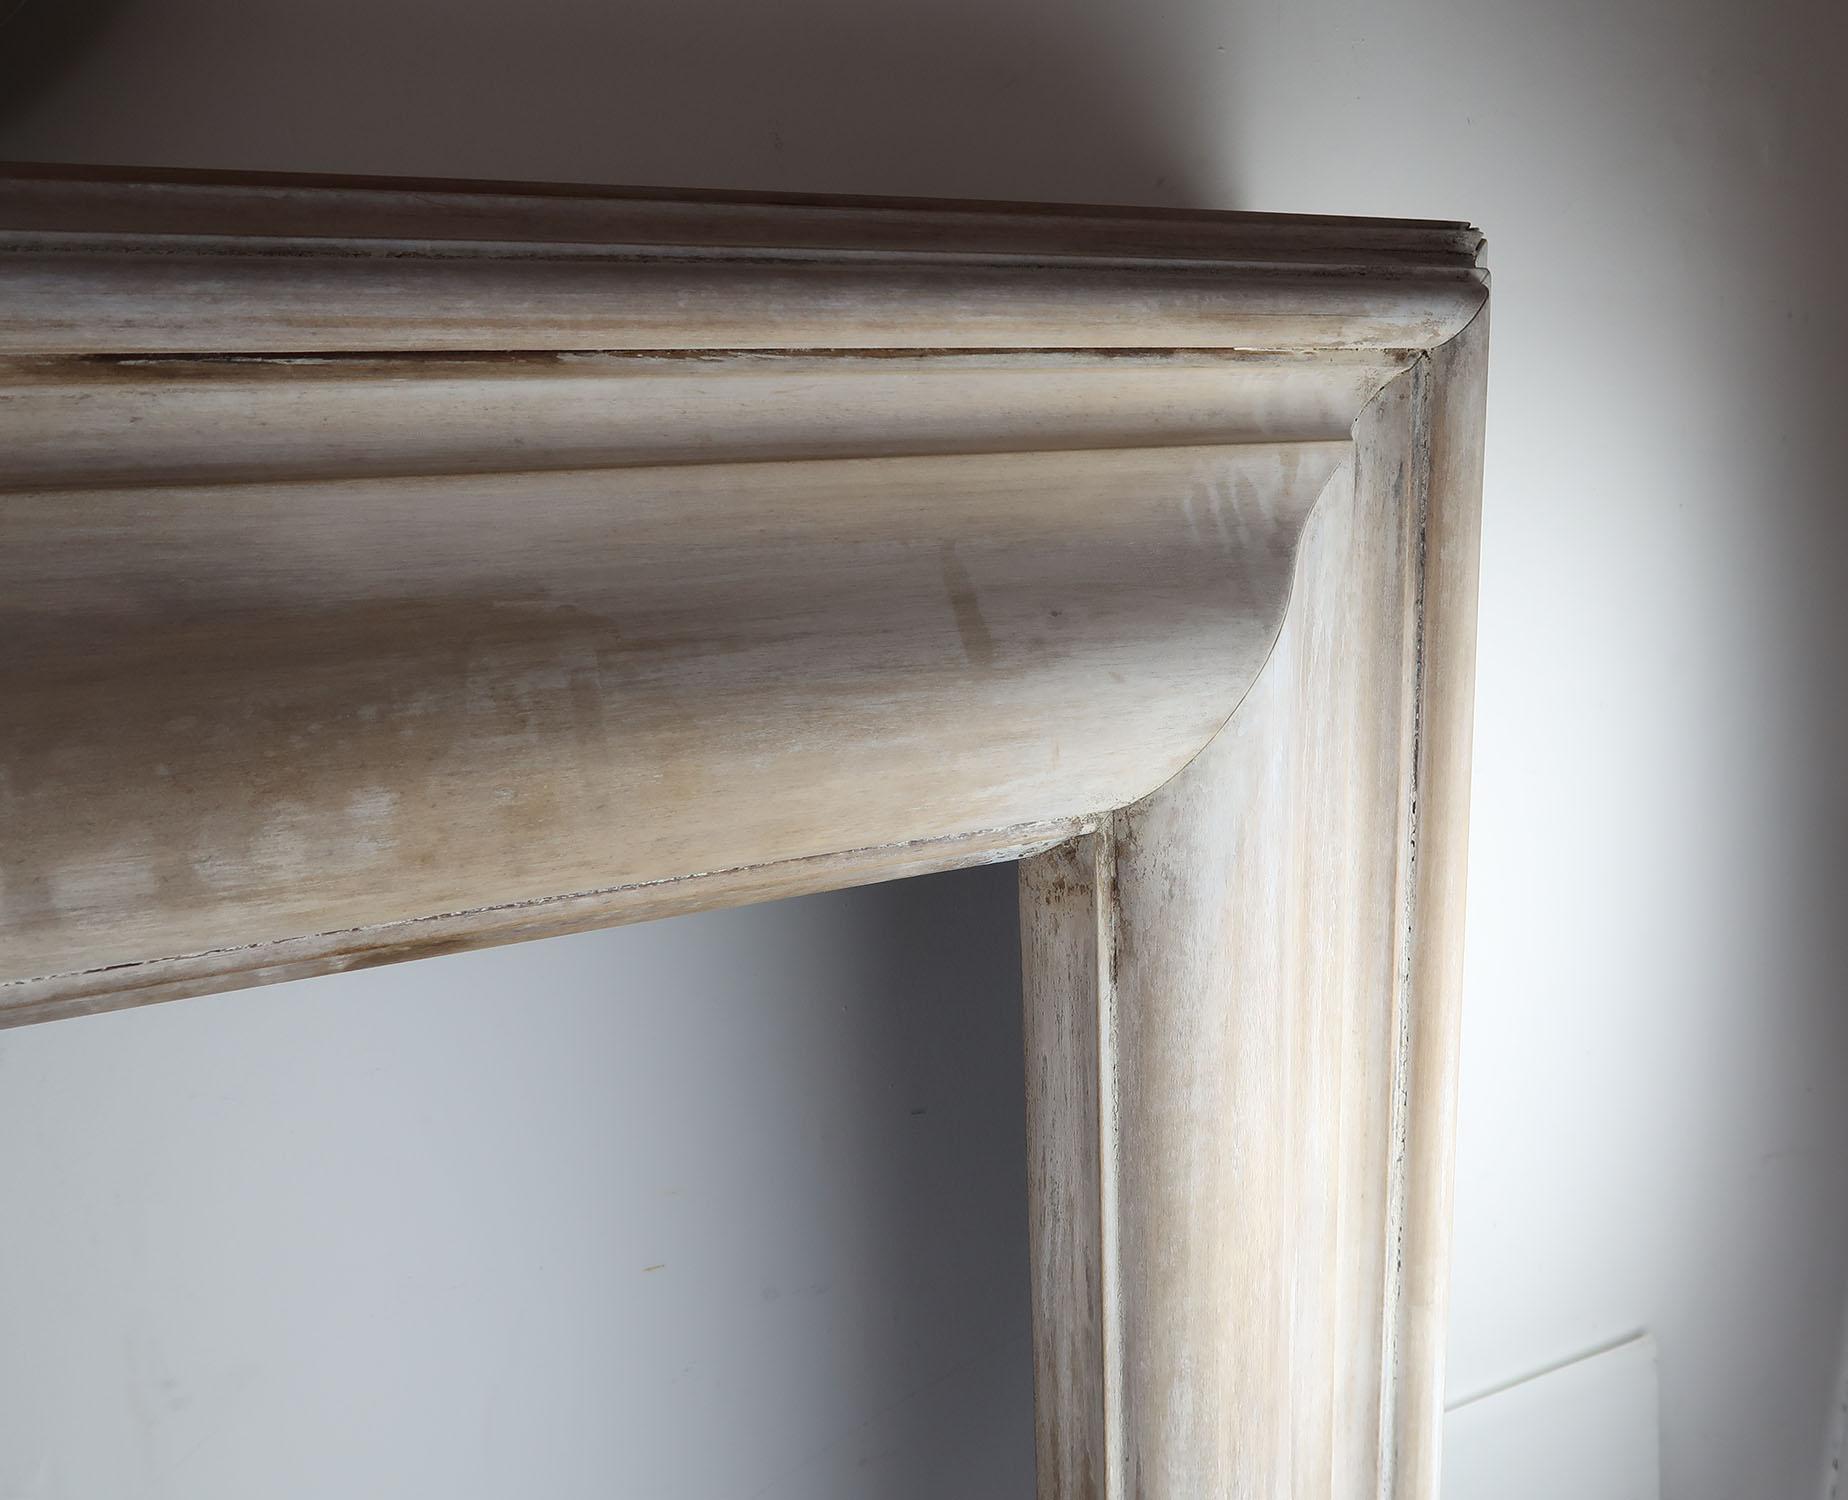 Fabulous walnut fire surround or mantel

I particularly like the simplicity of the piece

Makers label of Bratt Colbran, London on the back

Solid bleached walnut

It has a stone like appearance.





 